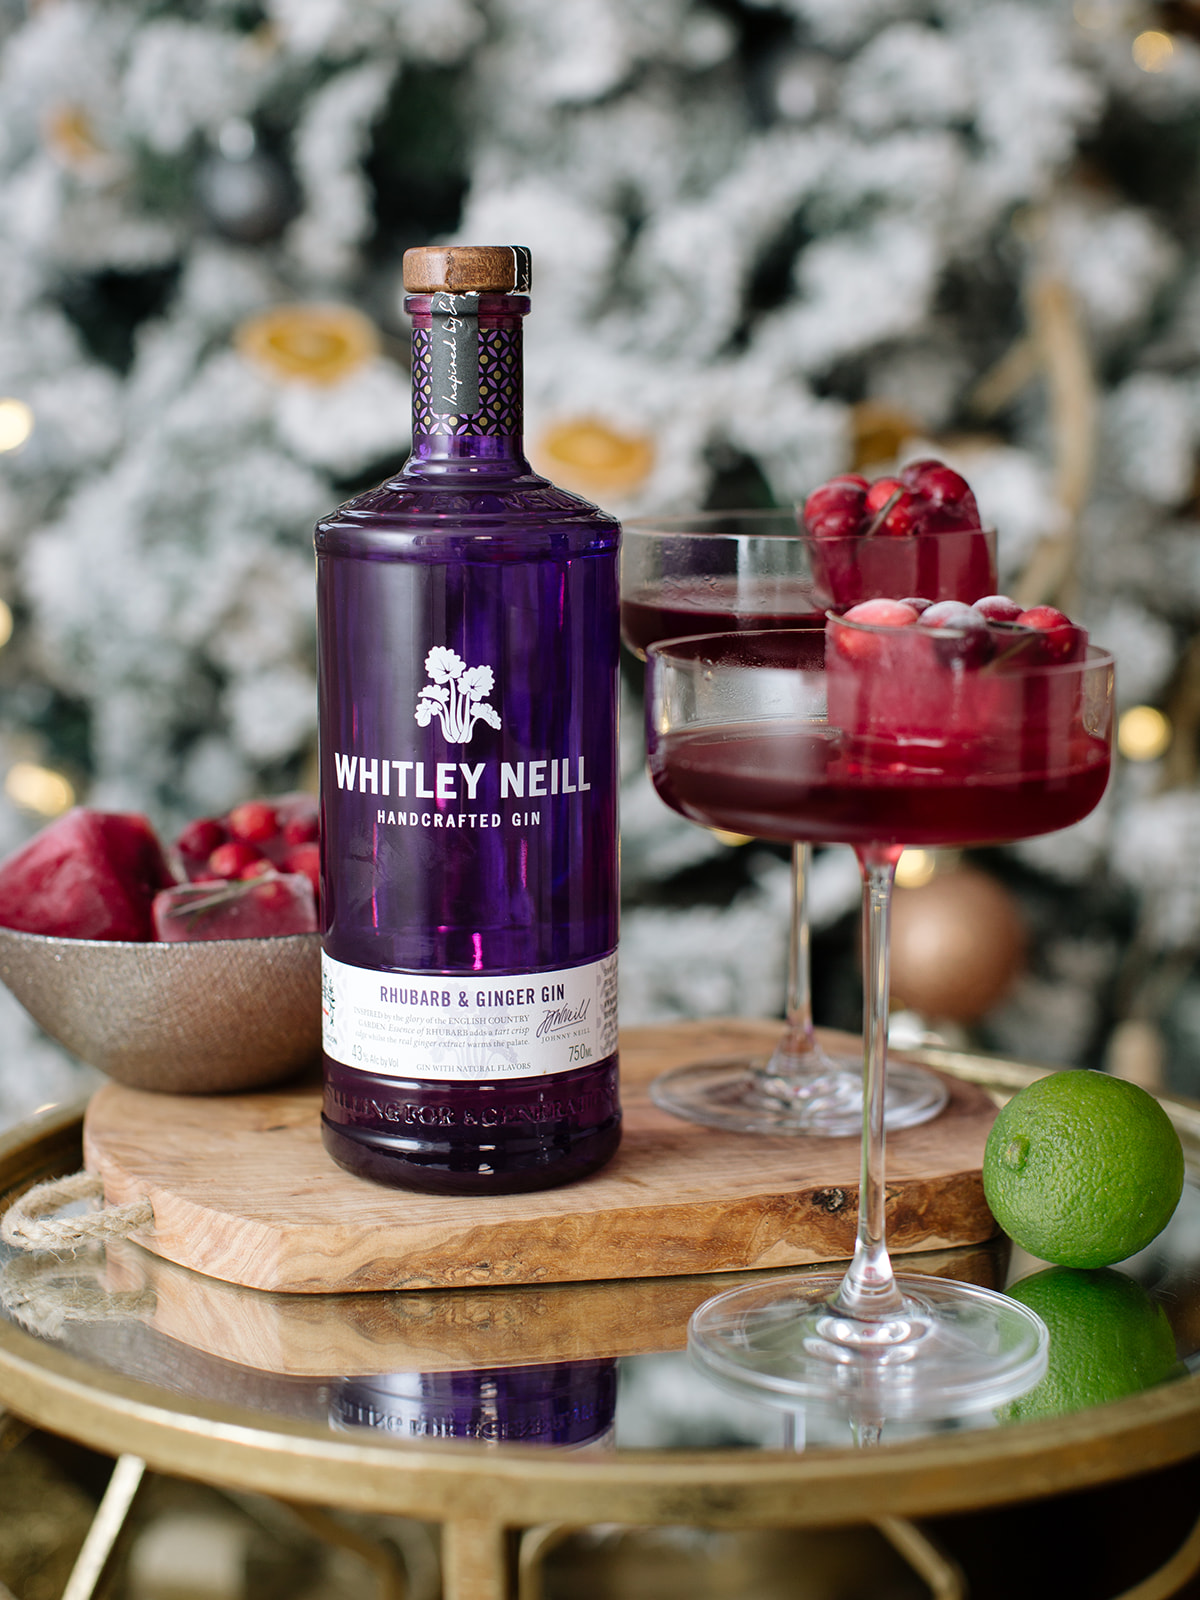 Looking for the perfect Christmas cocktail recipe? CLICK HERE to make the Pomegranate Fizz recipe and see why it is the Perfect Christmas Cocktail this holiday season!